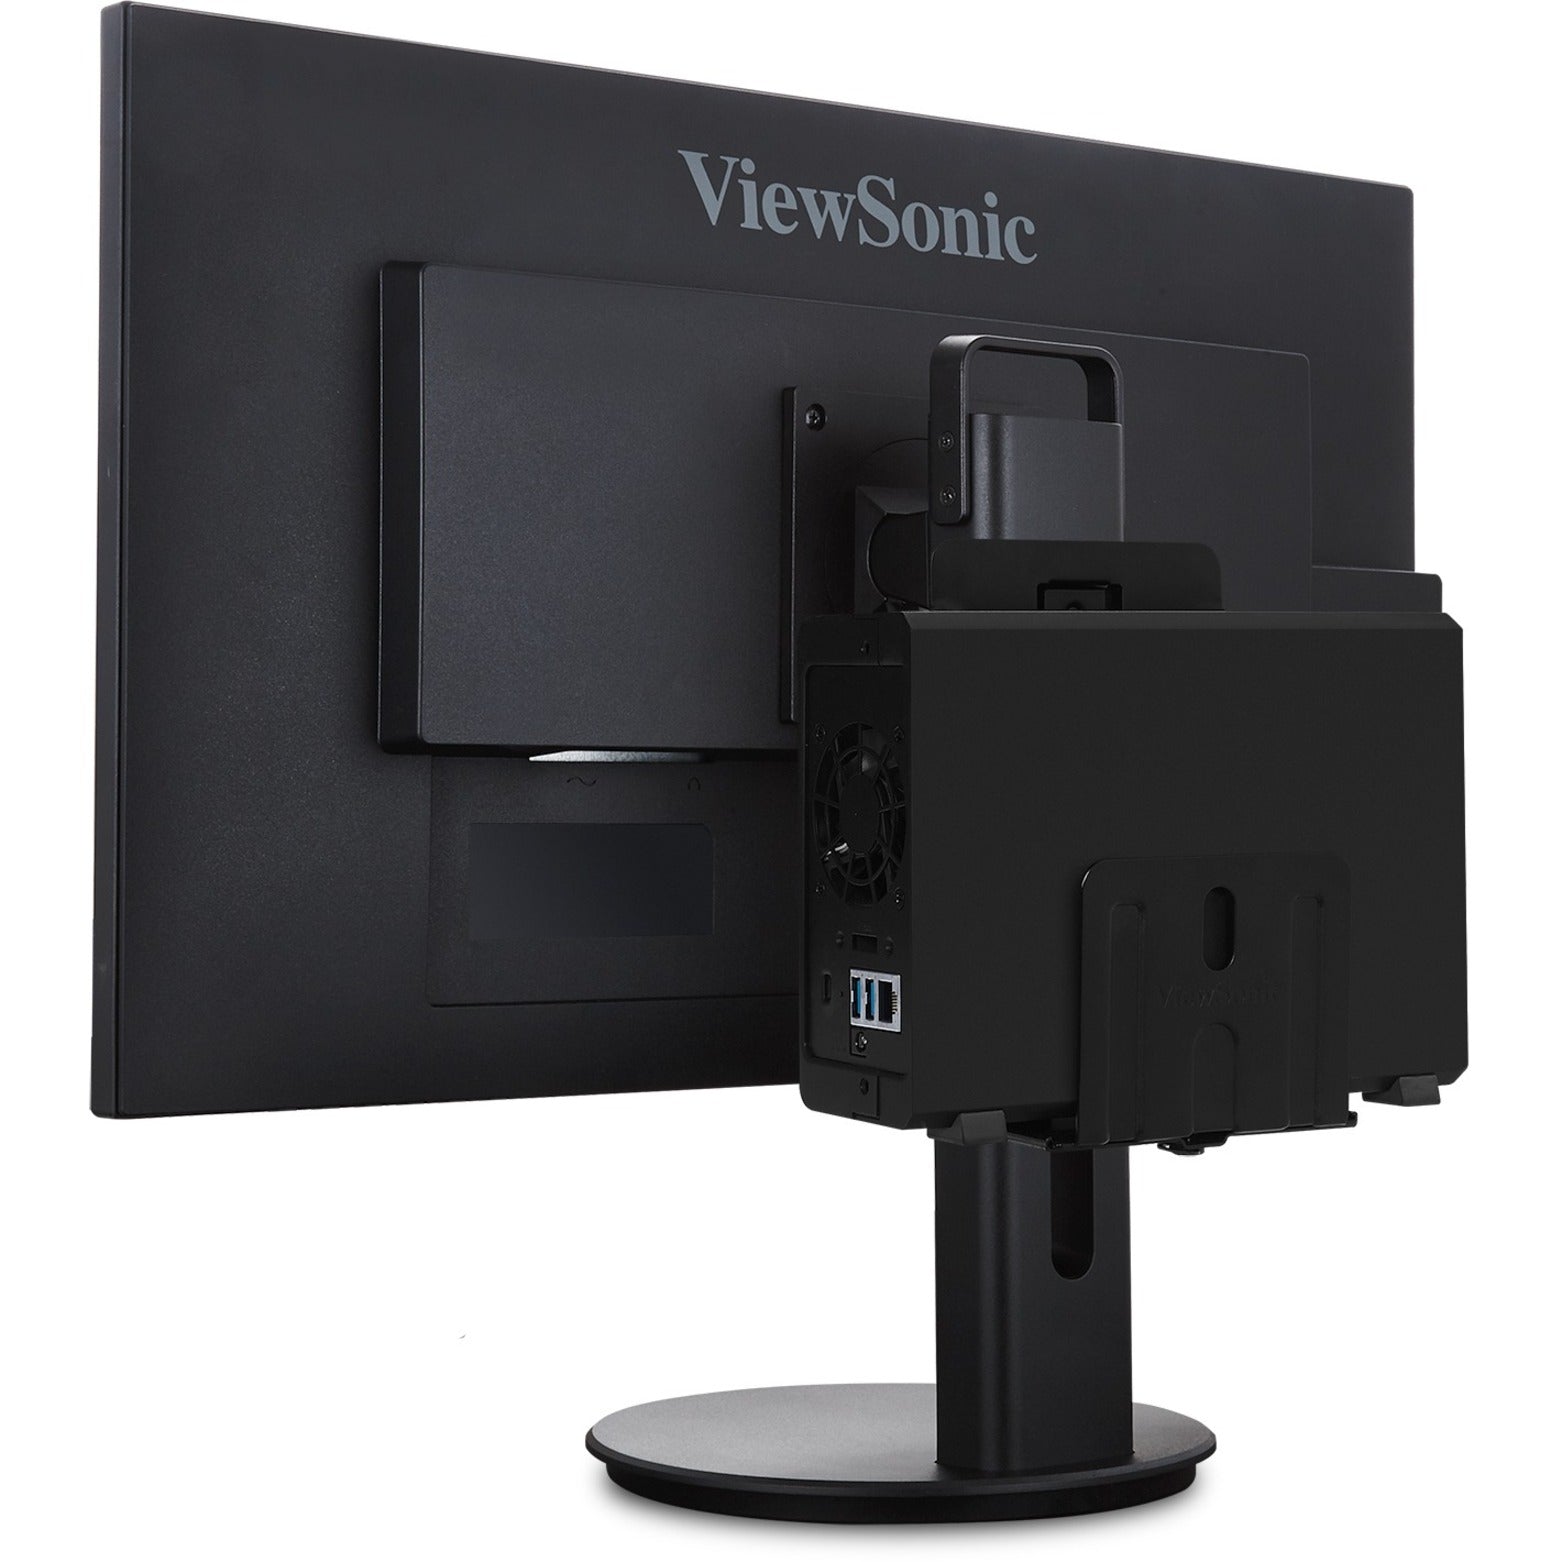 ViewSonic LCD-CMK-001 Universal Client Mounting Kit for Monitor - Black